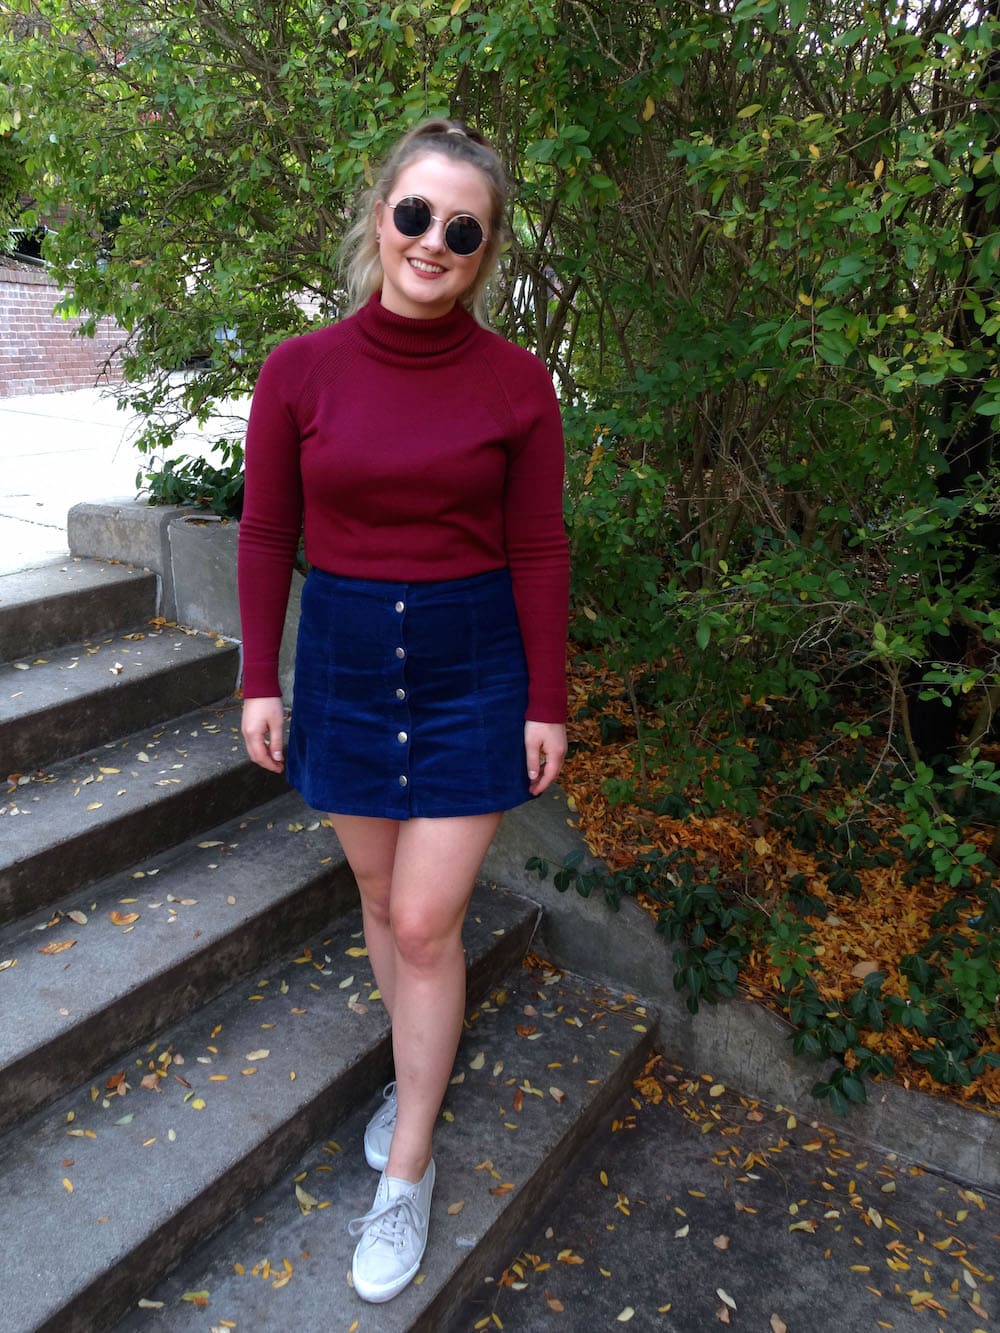 West Virginia Student Emma in a fall-forward outfit. She pairs a maroon turtleneck sweater with a high-waisted blue button-up corduroy miniskirt with grey sneakers and circular frame sunglasses.